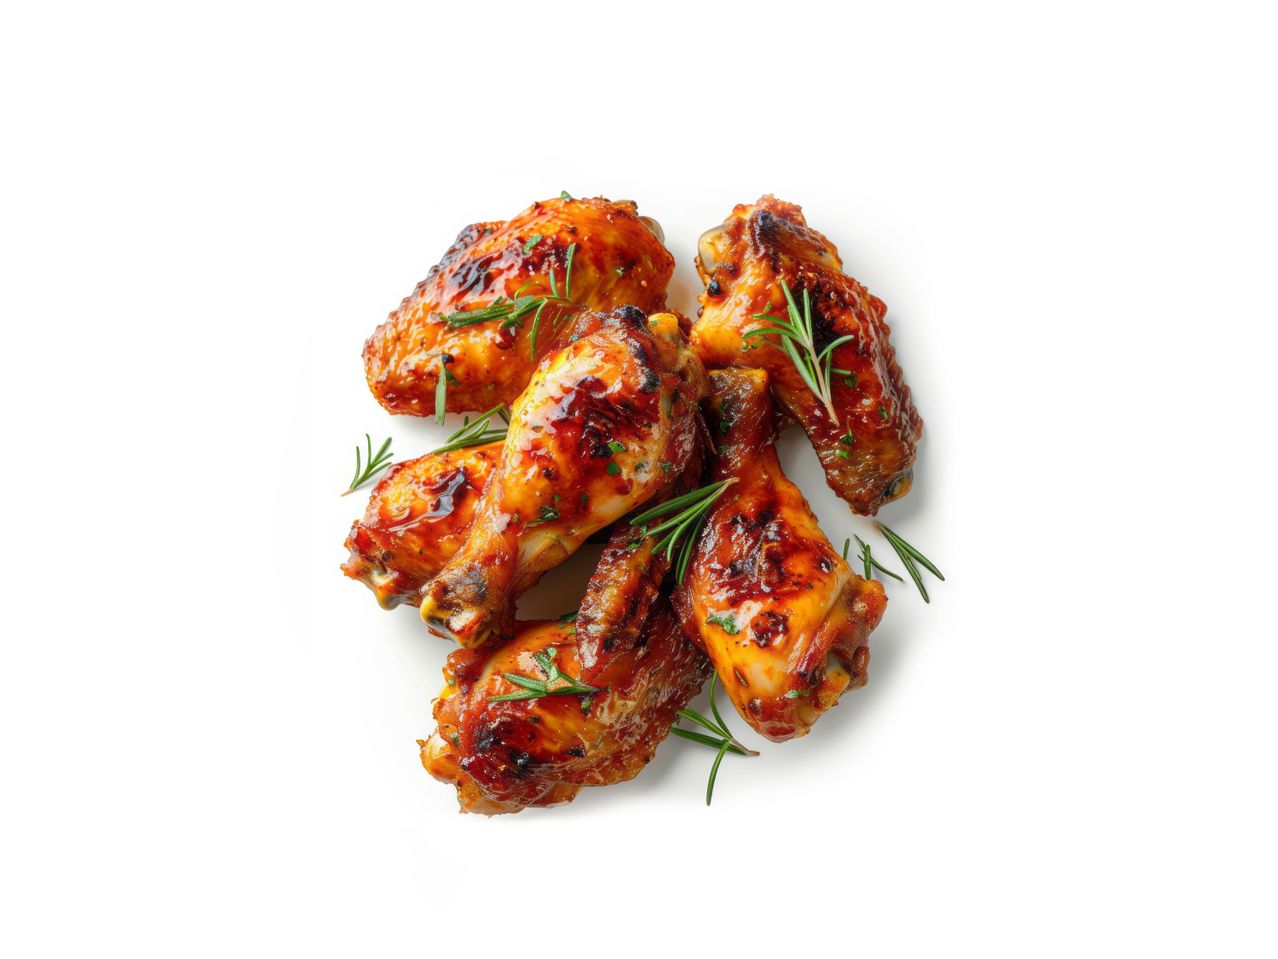 Go to full screen view: Marinated Chicken Wings with Paprika Sauce - Image 1